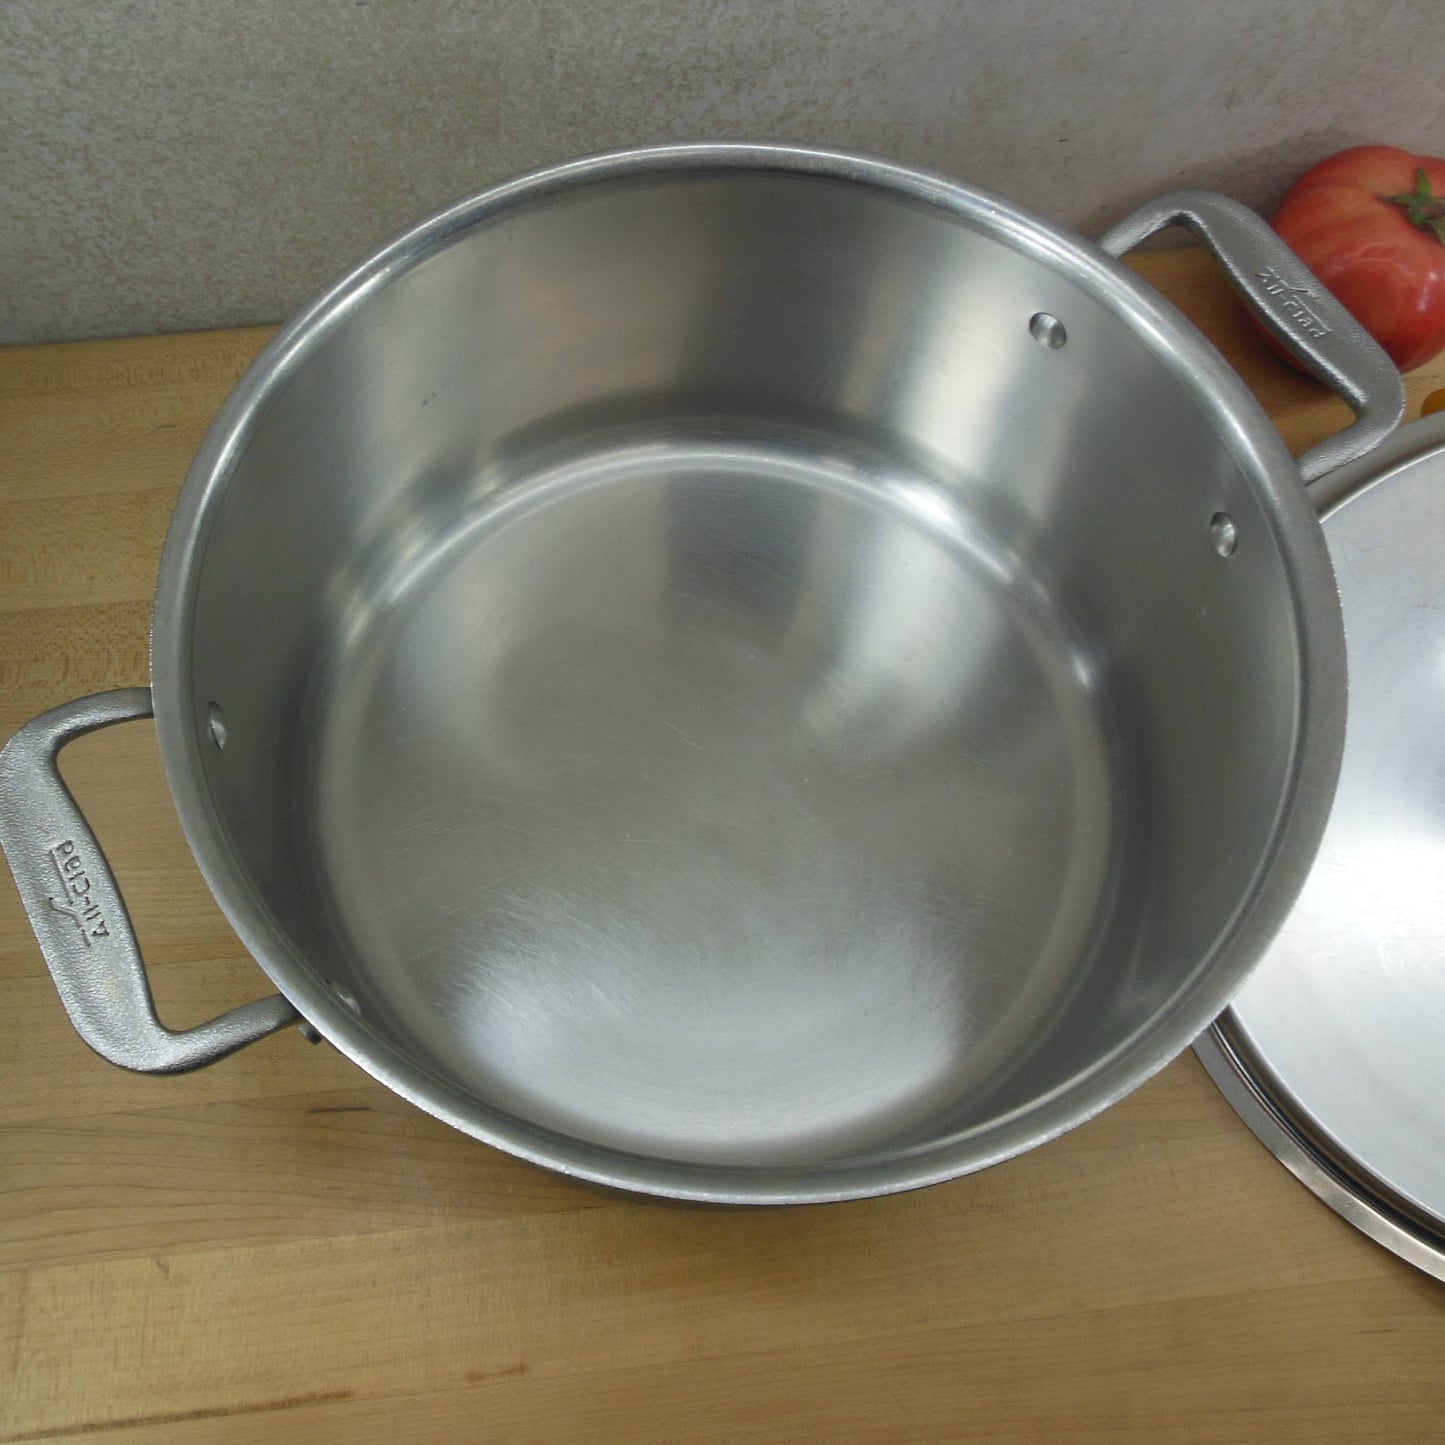 All-Clad Ltd USA 8 Quart Stock Soup Pot Stainless Steel - Discounted used